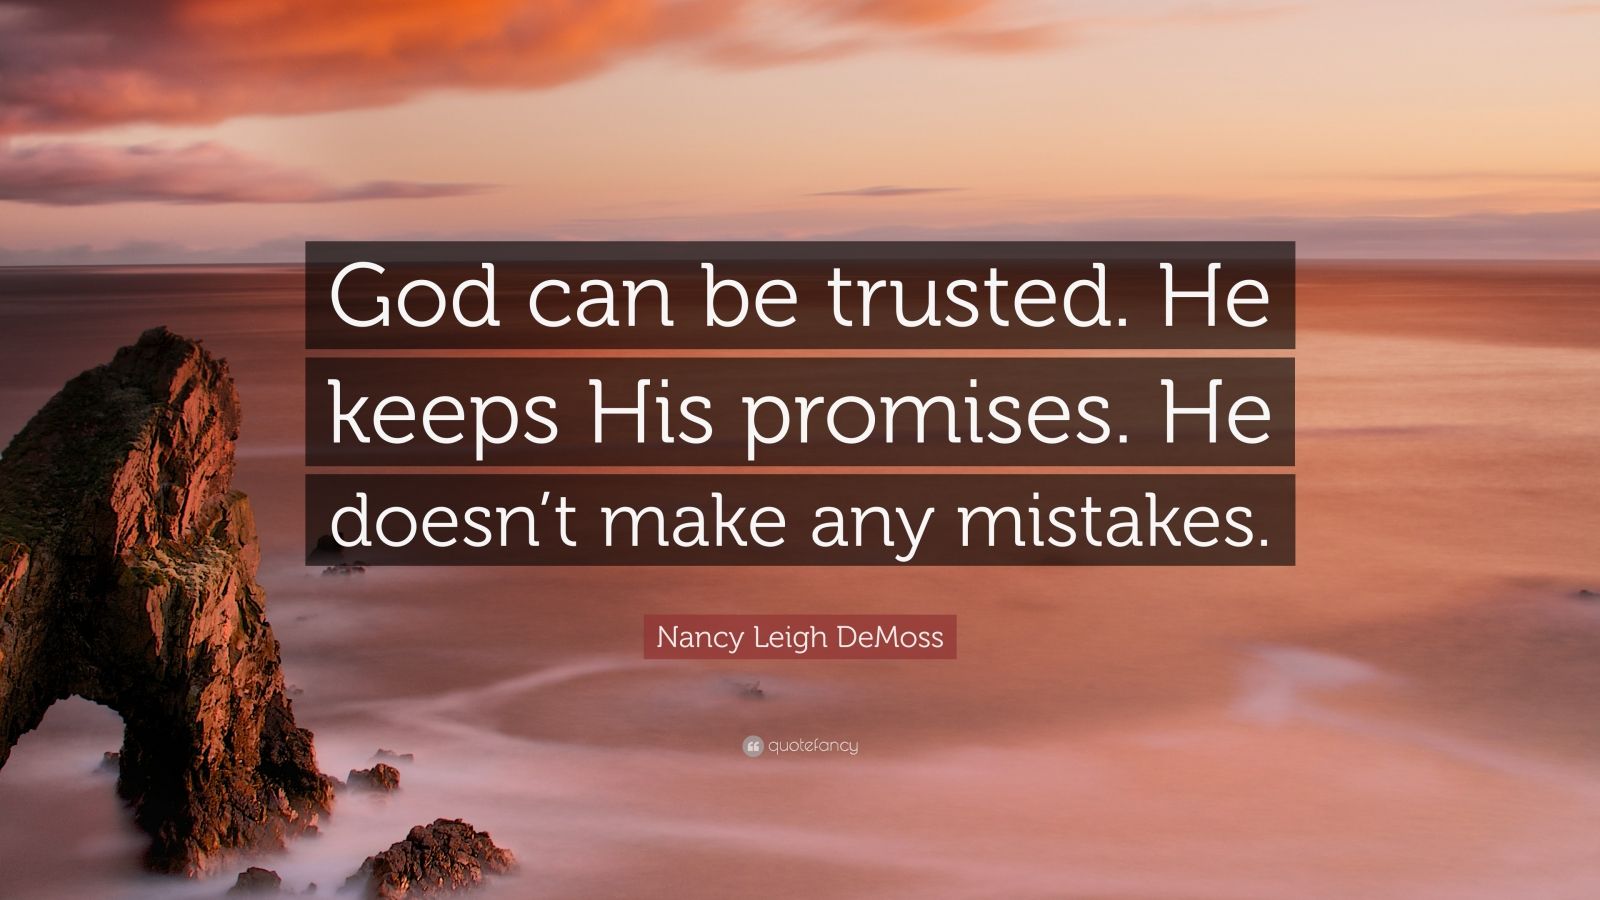 Nancy Leigh DeMoss Quote: “God can be trusted. He keeps His promises